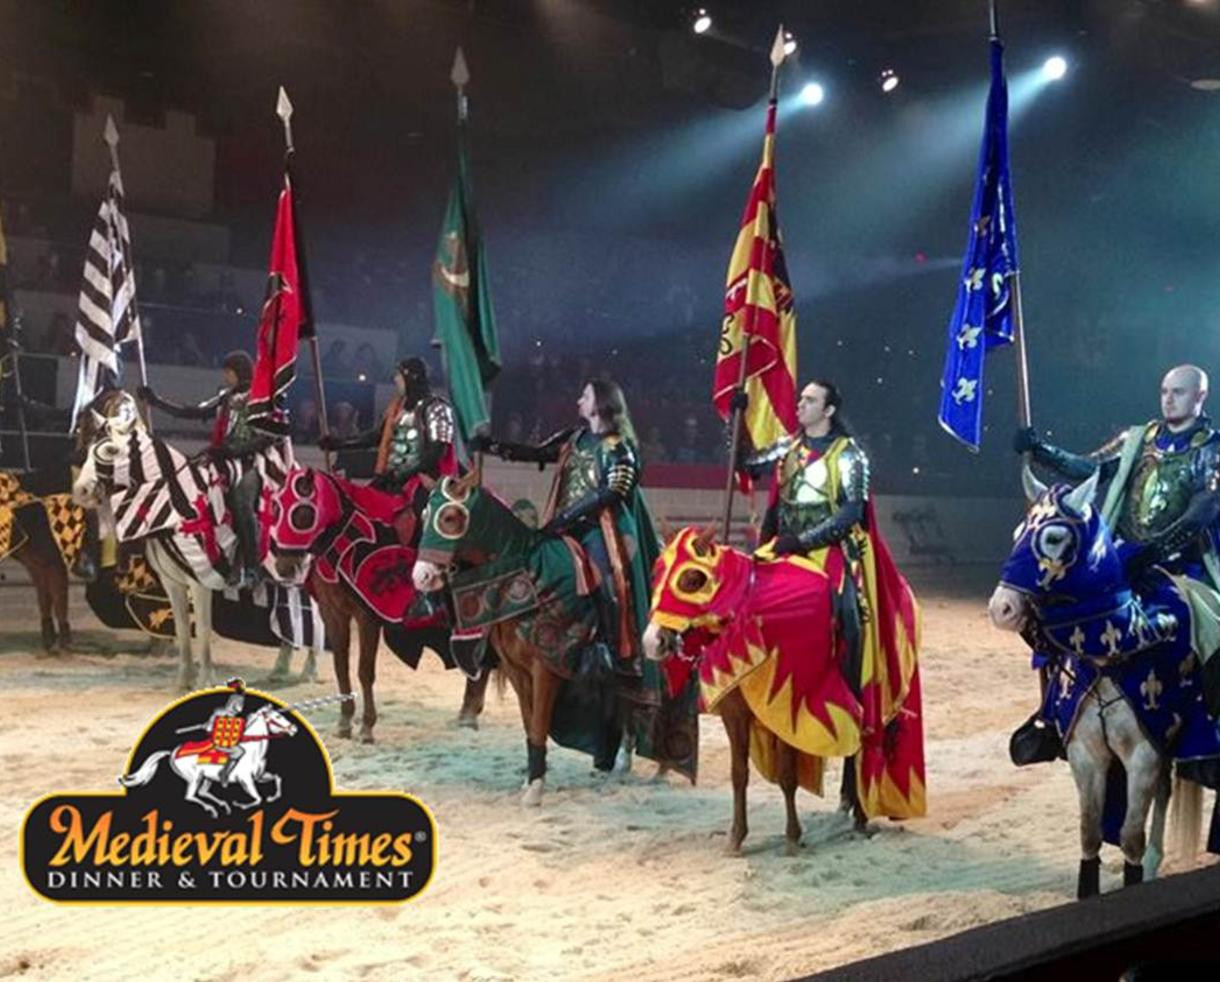 Medieval Times Dinner And Tournament
 CHILD MEDIEVAL TIMES Dinner & Tournament Ticket No